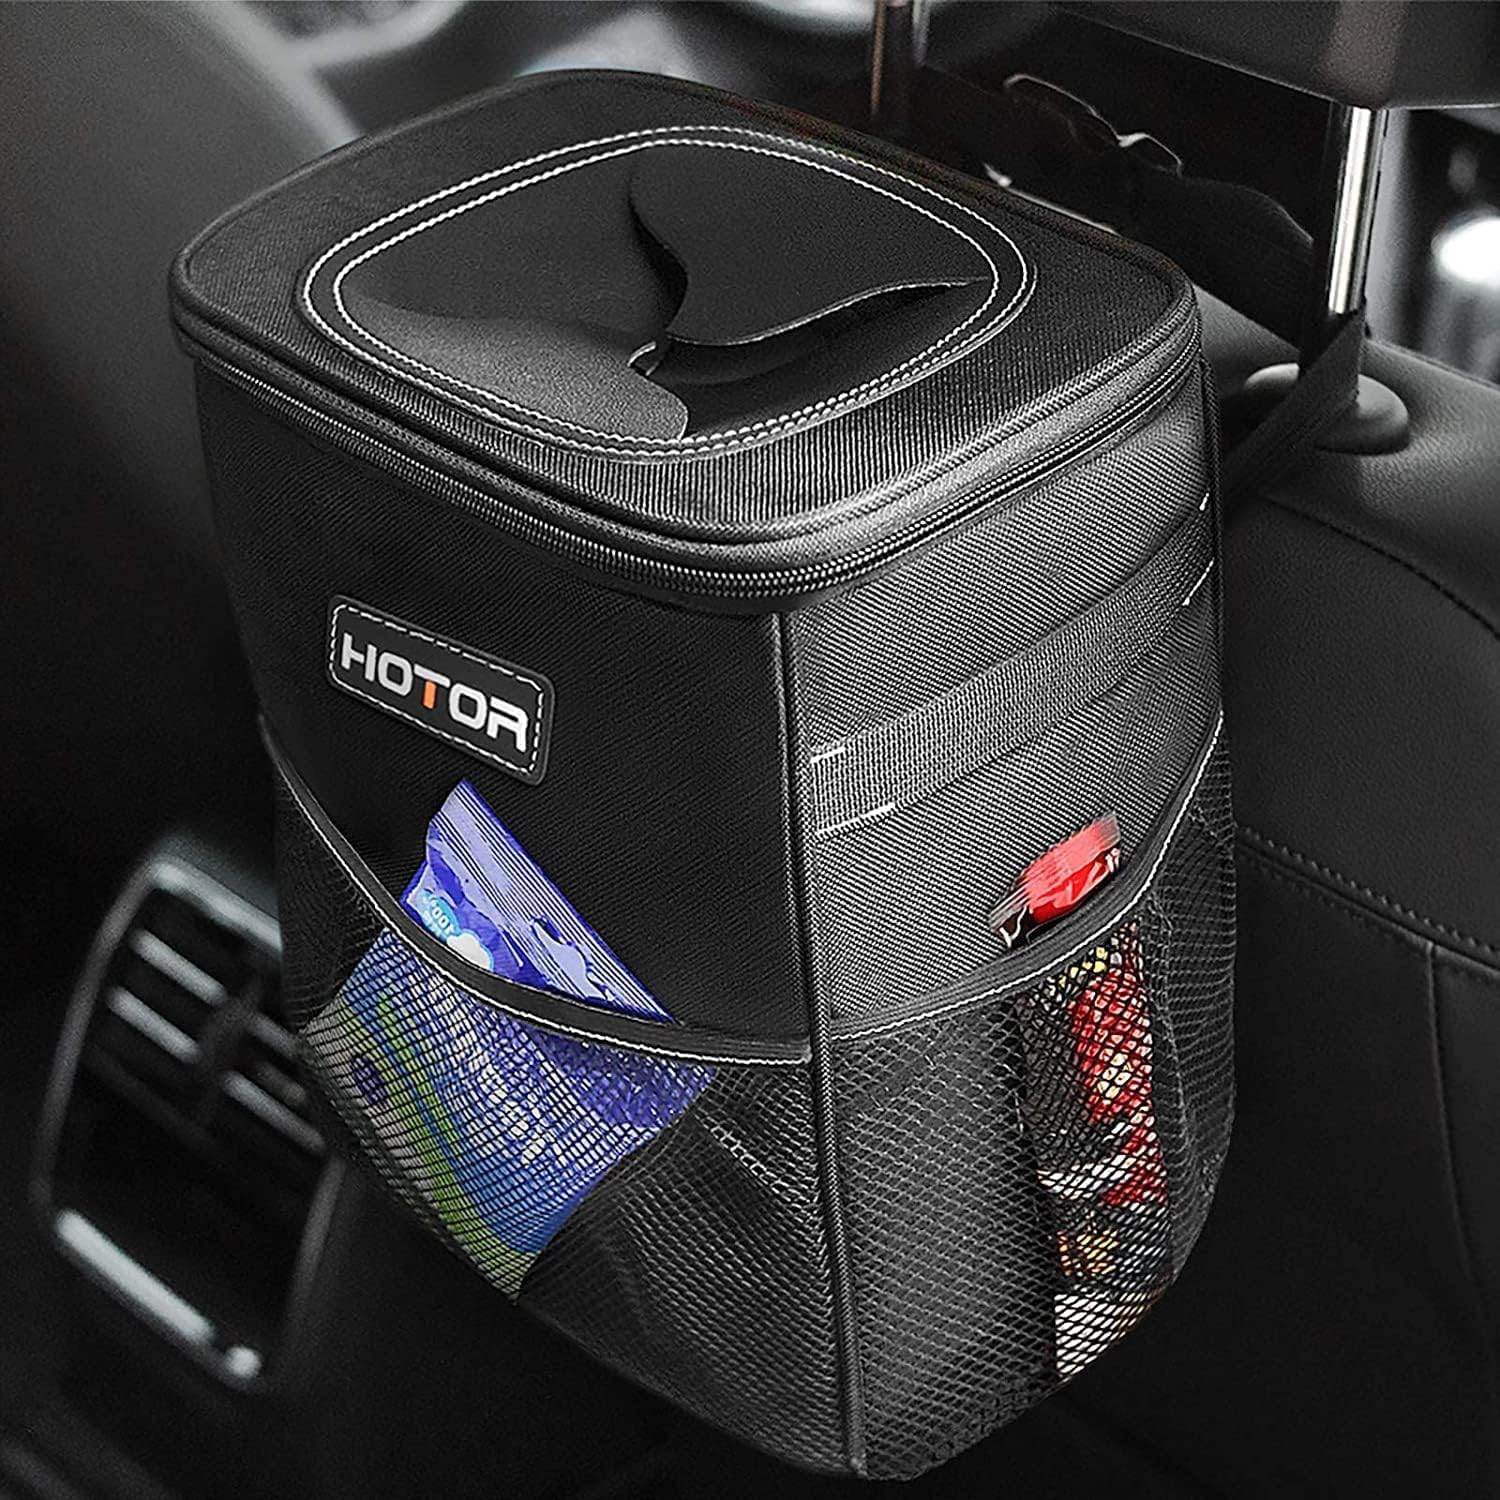 HOTOR Car Trash Can with Lid and Storage Pockets - 100% Leak-Proof Organizer, Waterproof Garbage Can, Multipurpose Trash Bin for Car, 2 Gallons, Black